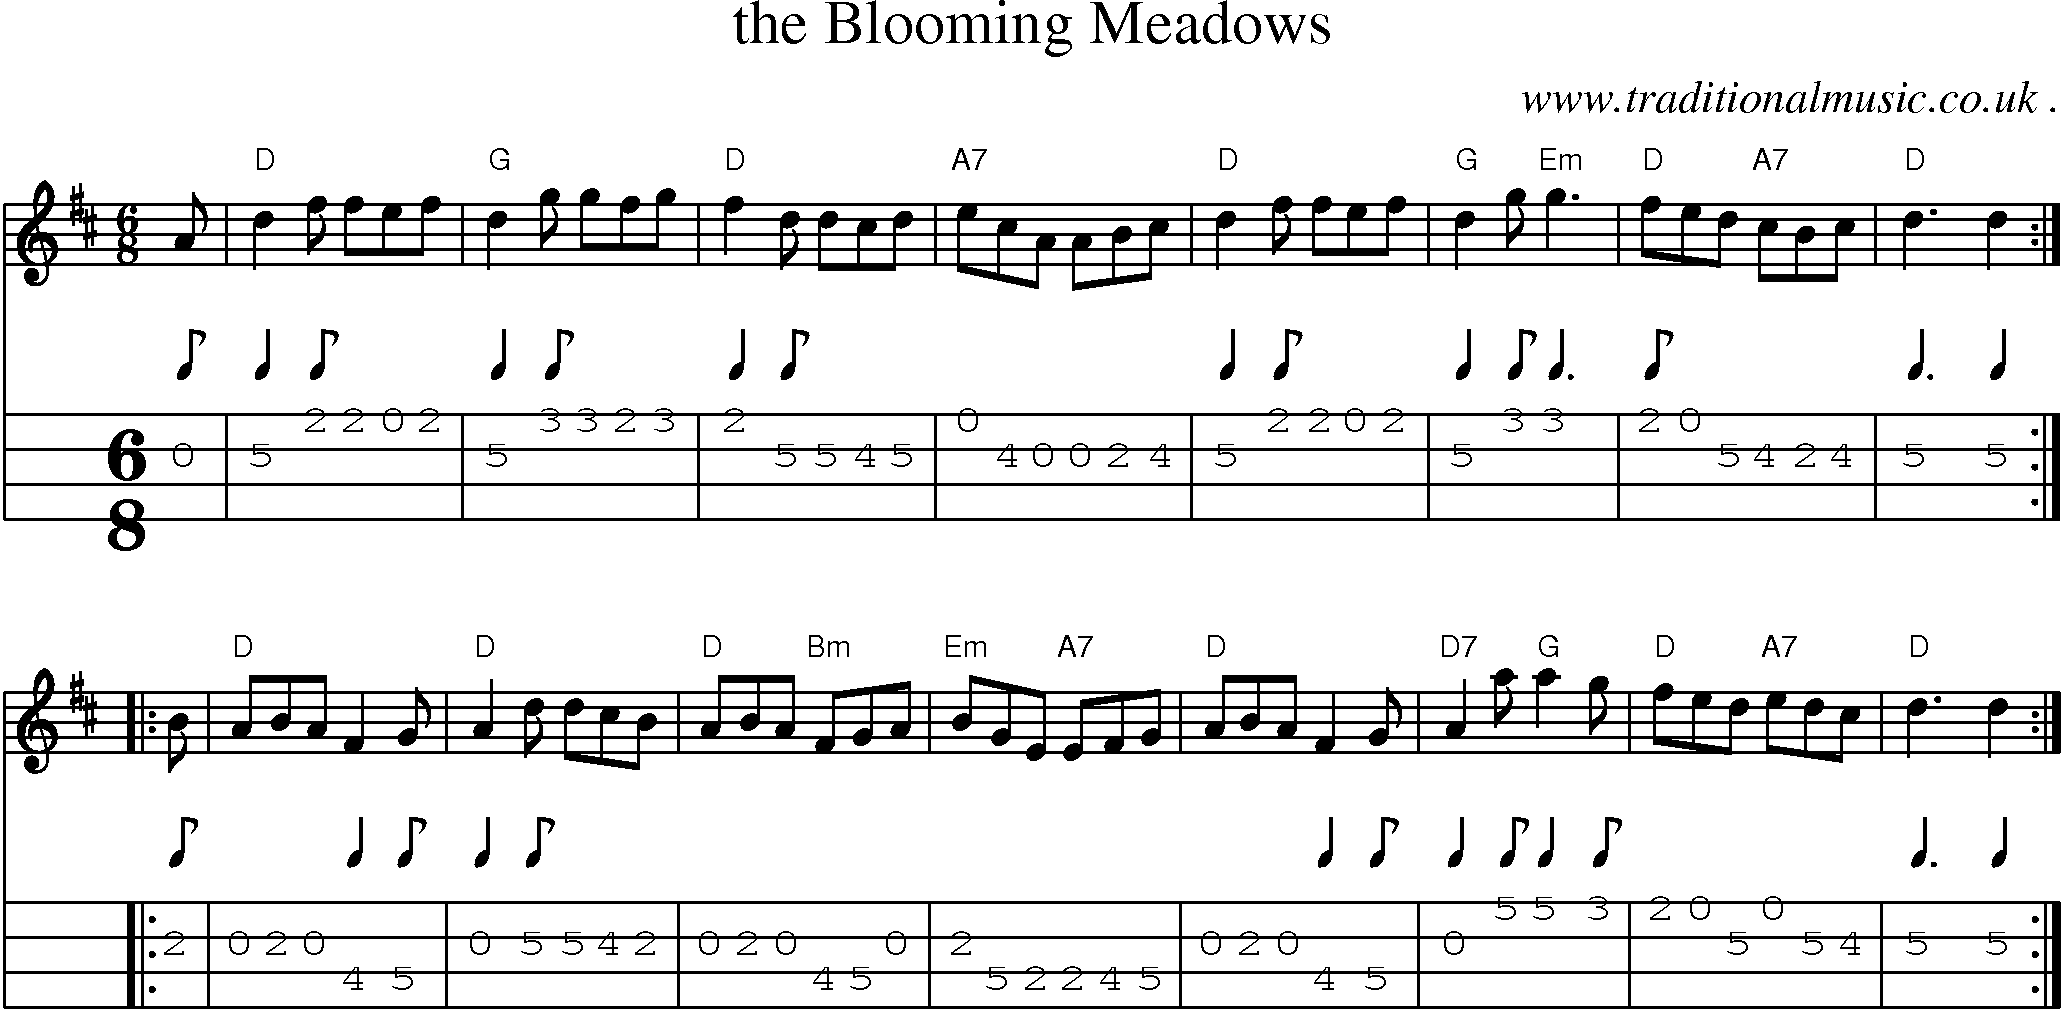 Sheet-music  score, Chords and Mandolin Tabs for The Blooming Meadows